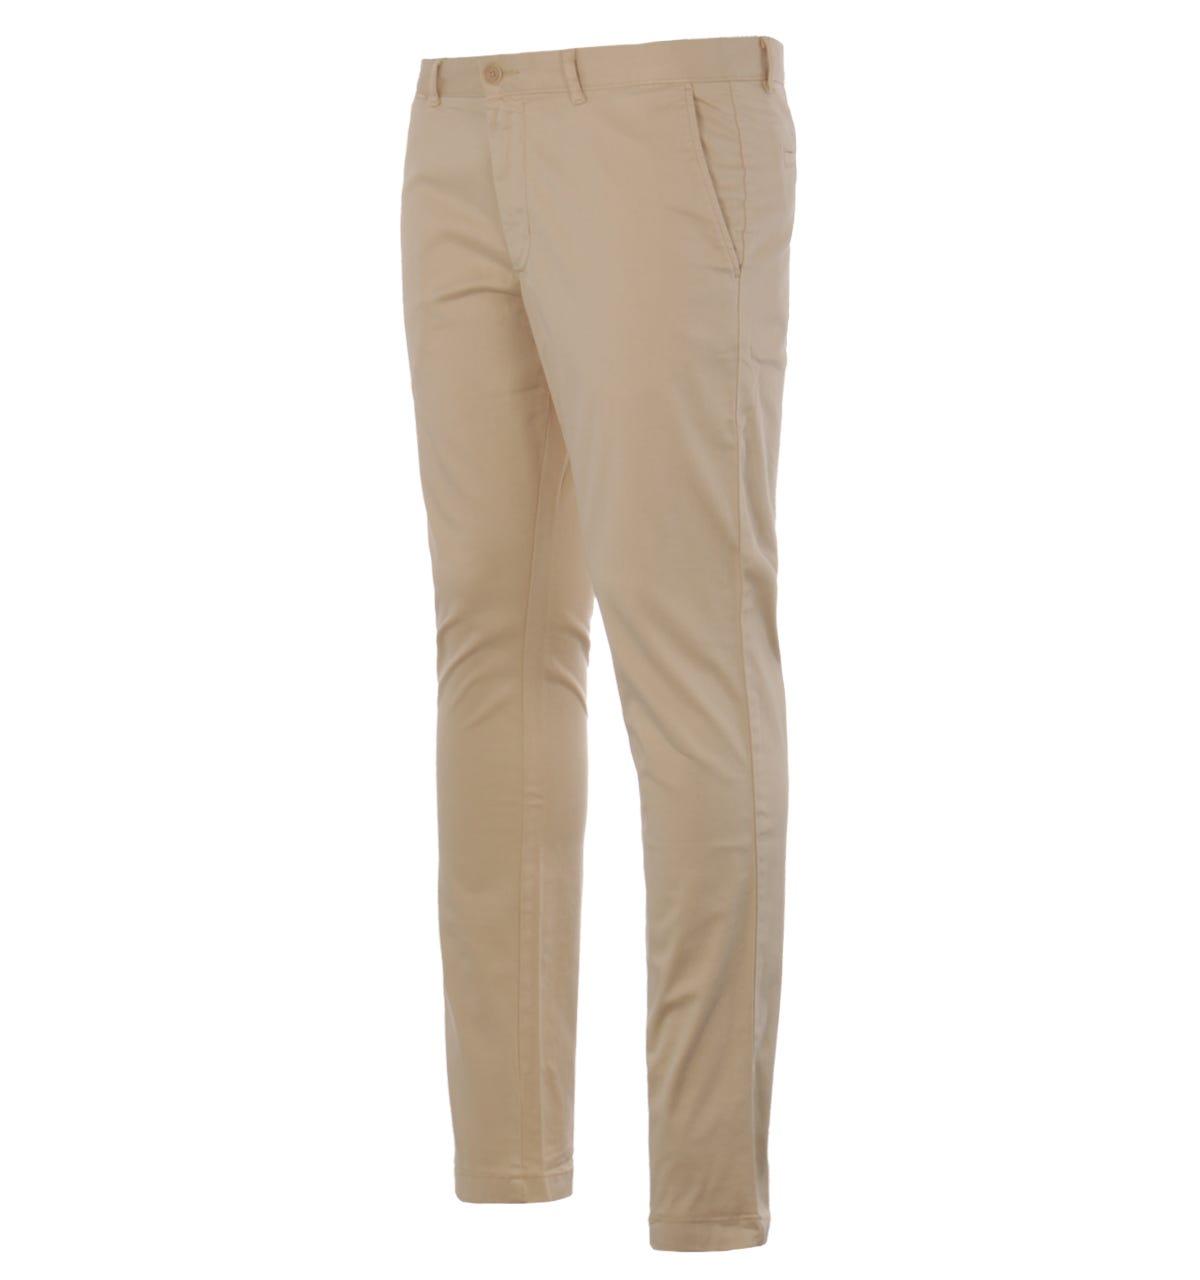 Tommy Hilfiger Cotton Bleeker Flex Slim Fit Chino Trousers in Beige  (Natural) for Men - Save 16% | Lyst